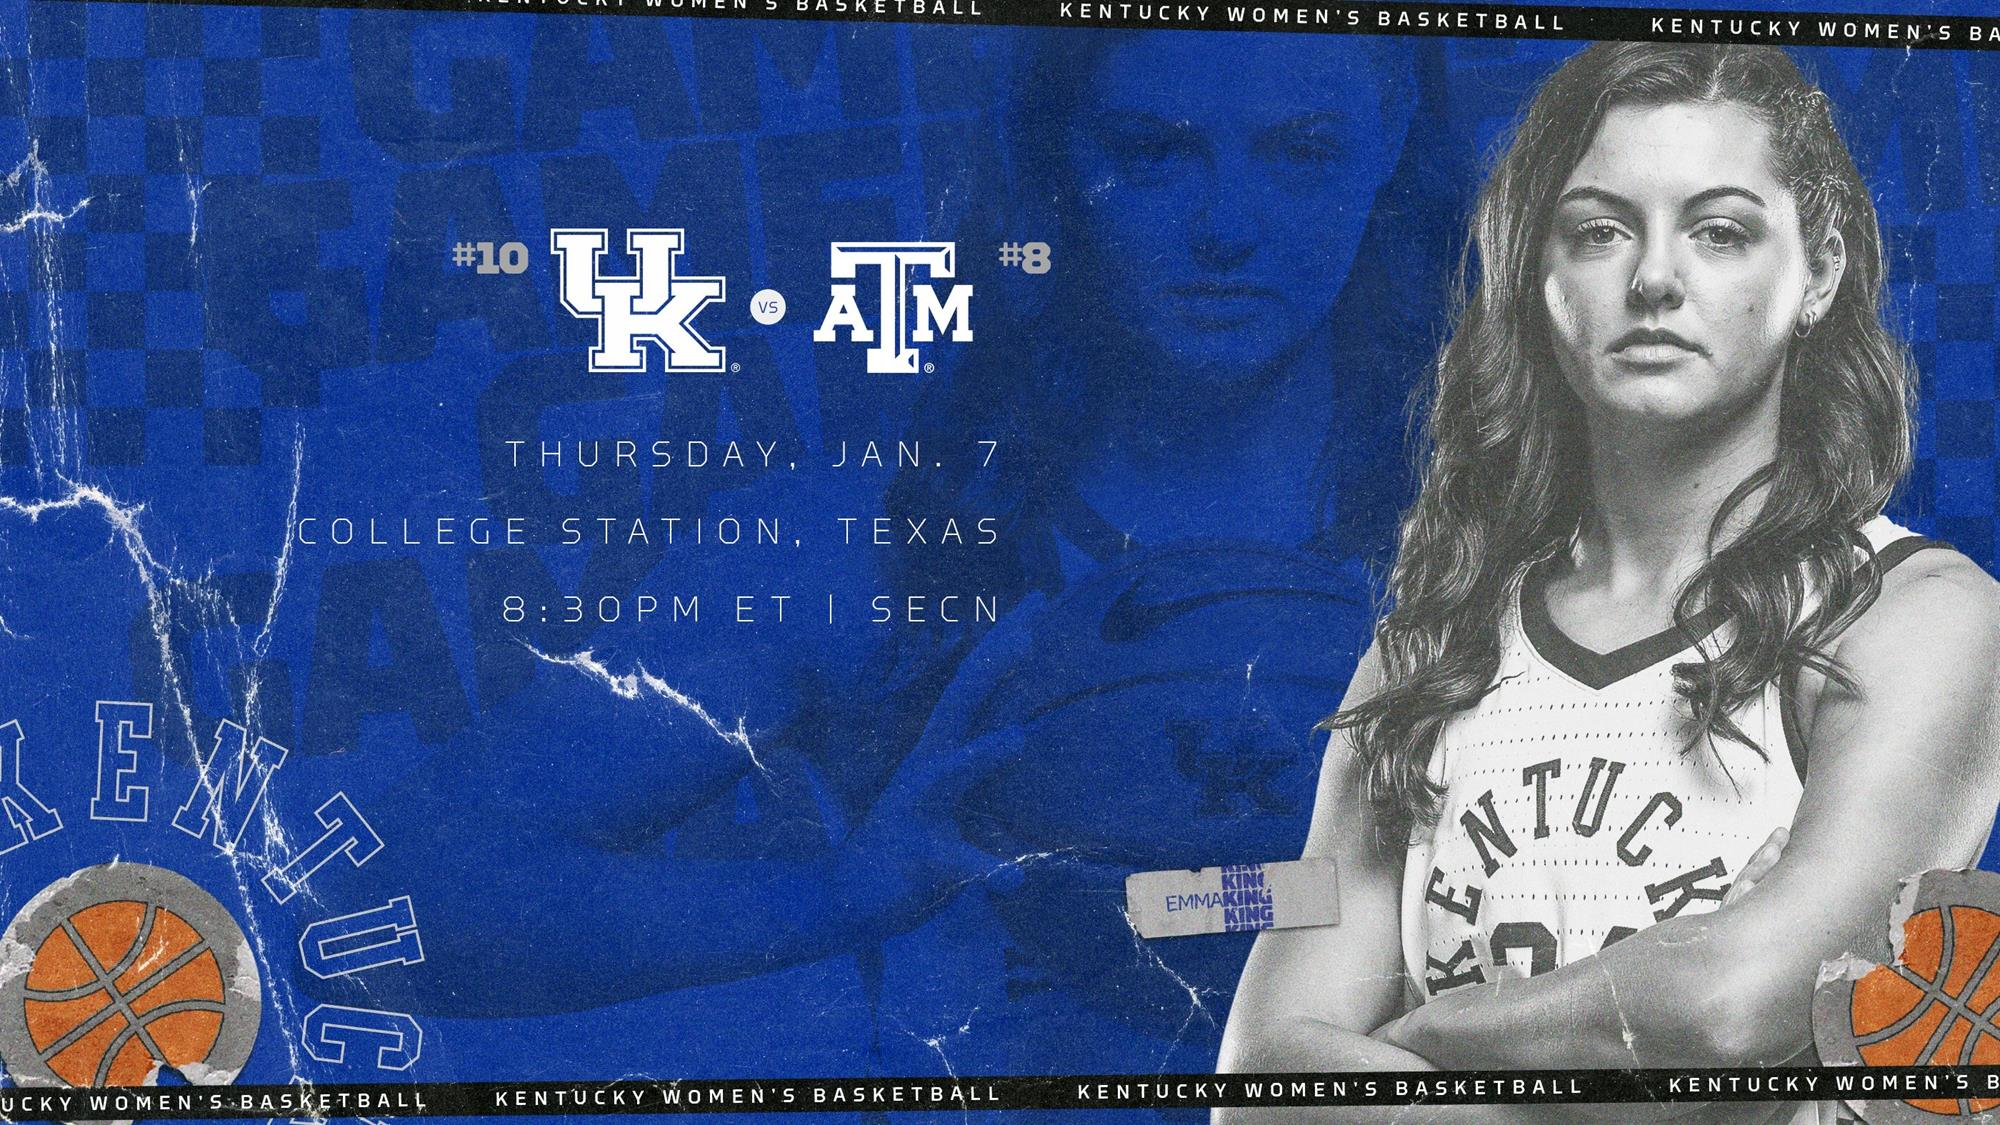 Wildcats Face Third Straight Top-15 Opponent, Travel to No. 8 TAMU Thursday